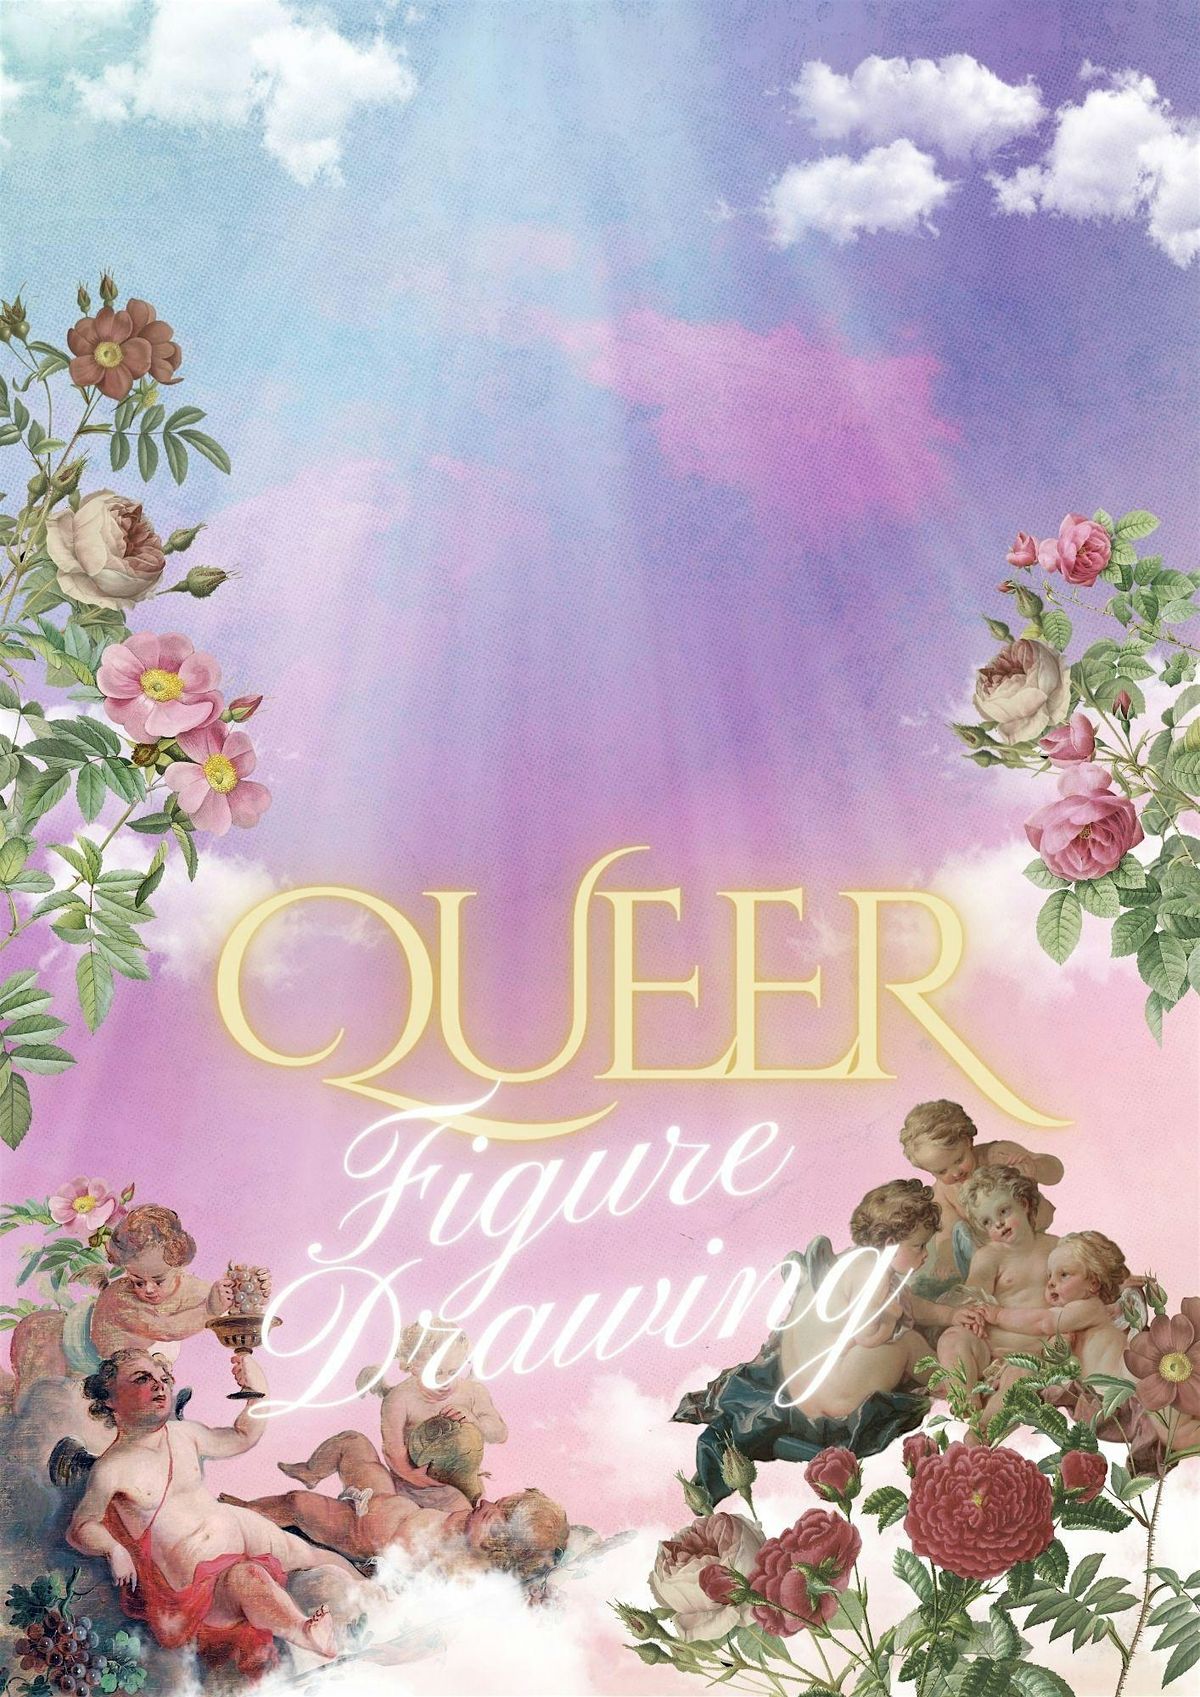 Queer Figure Drawing - May